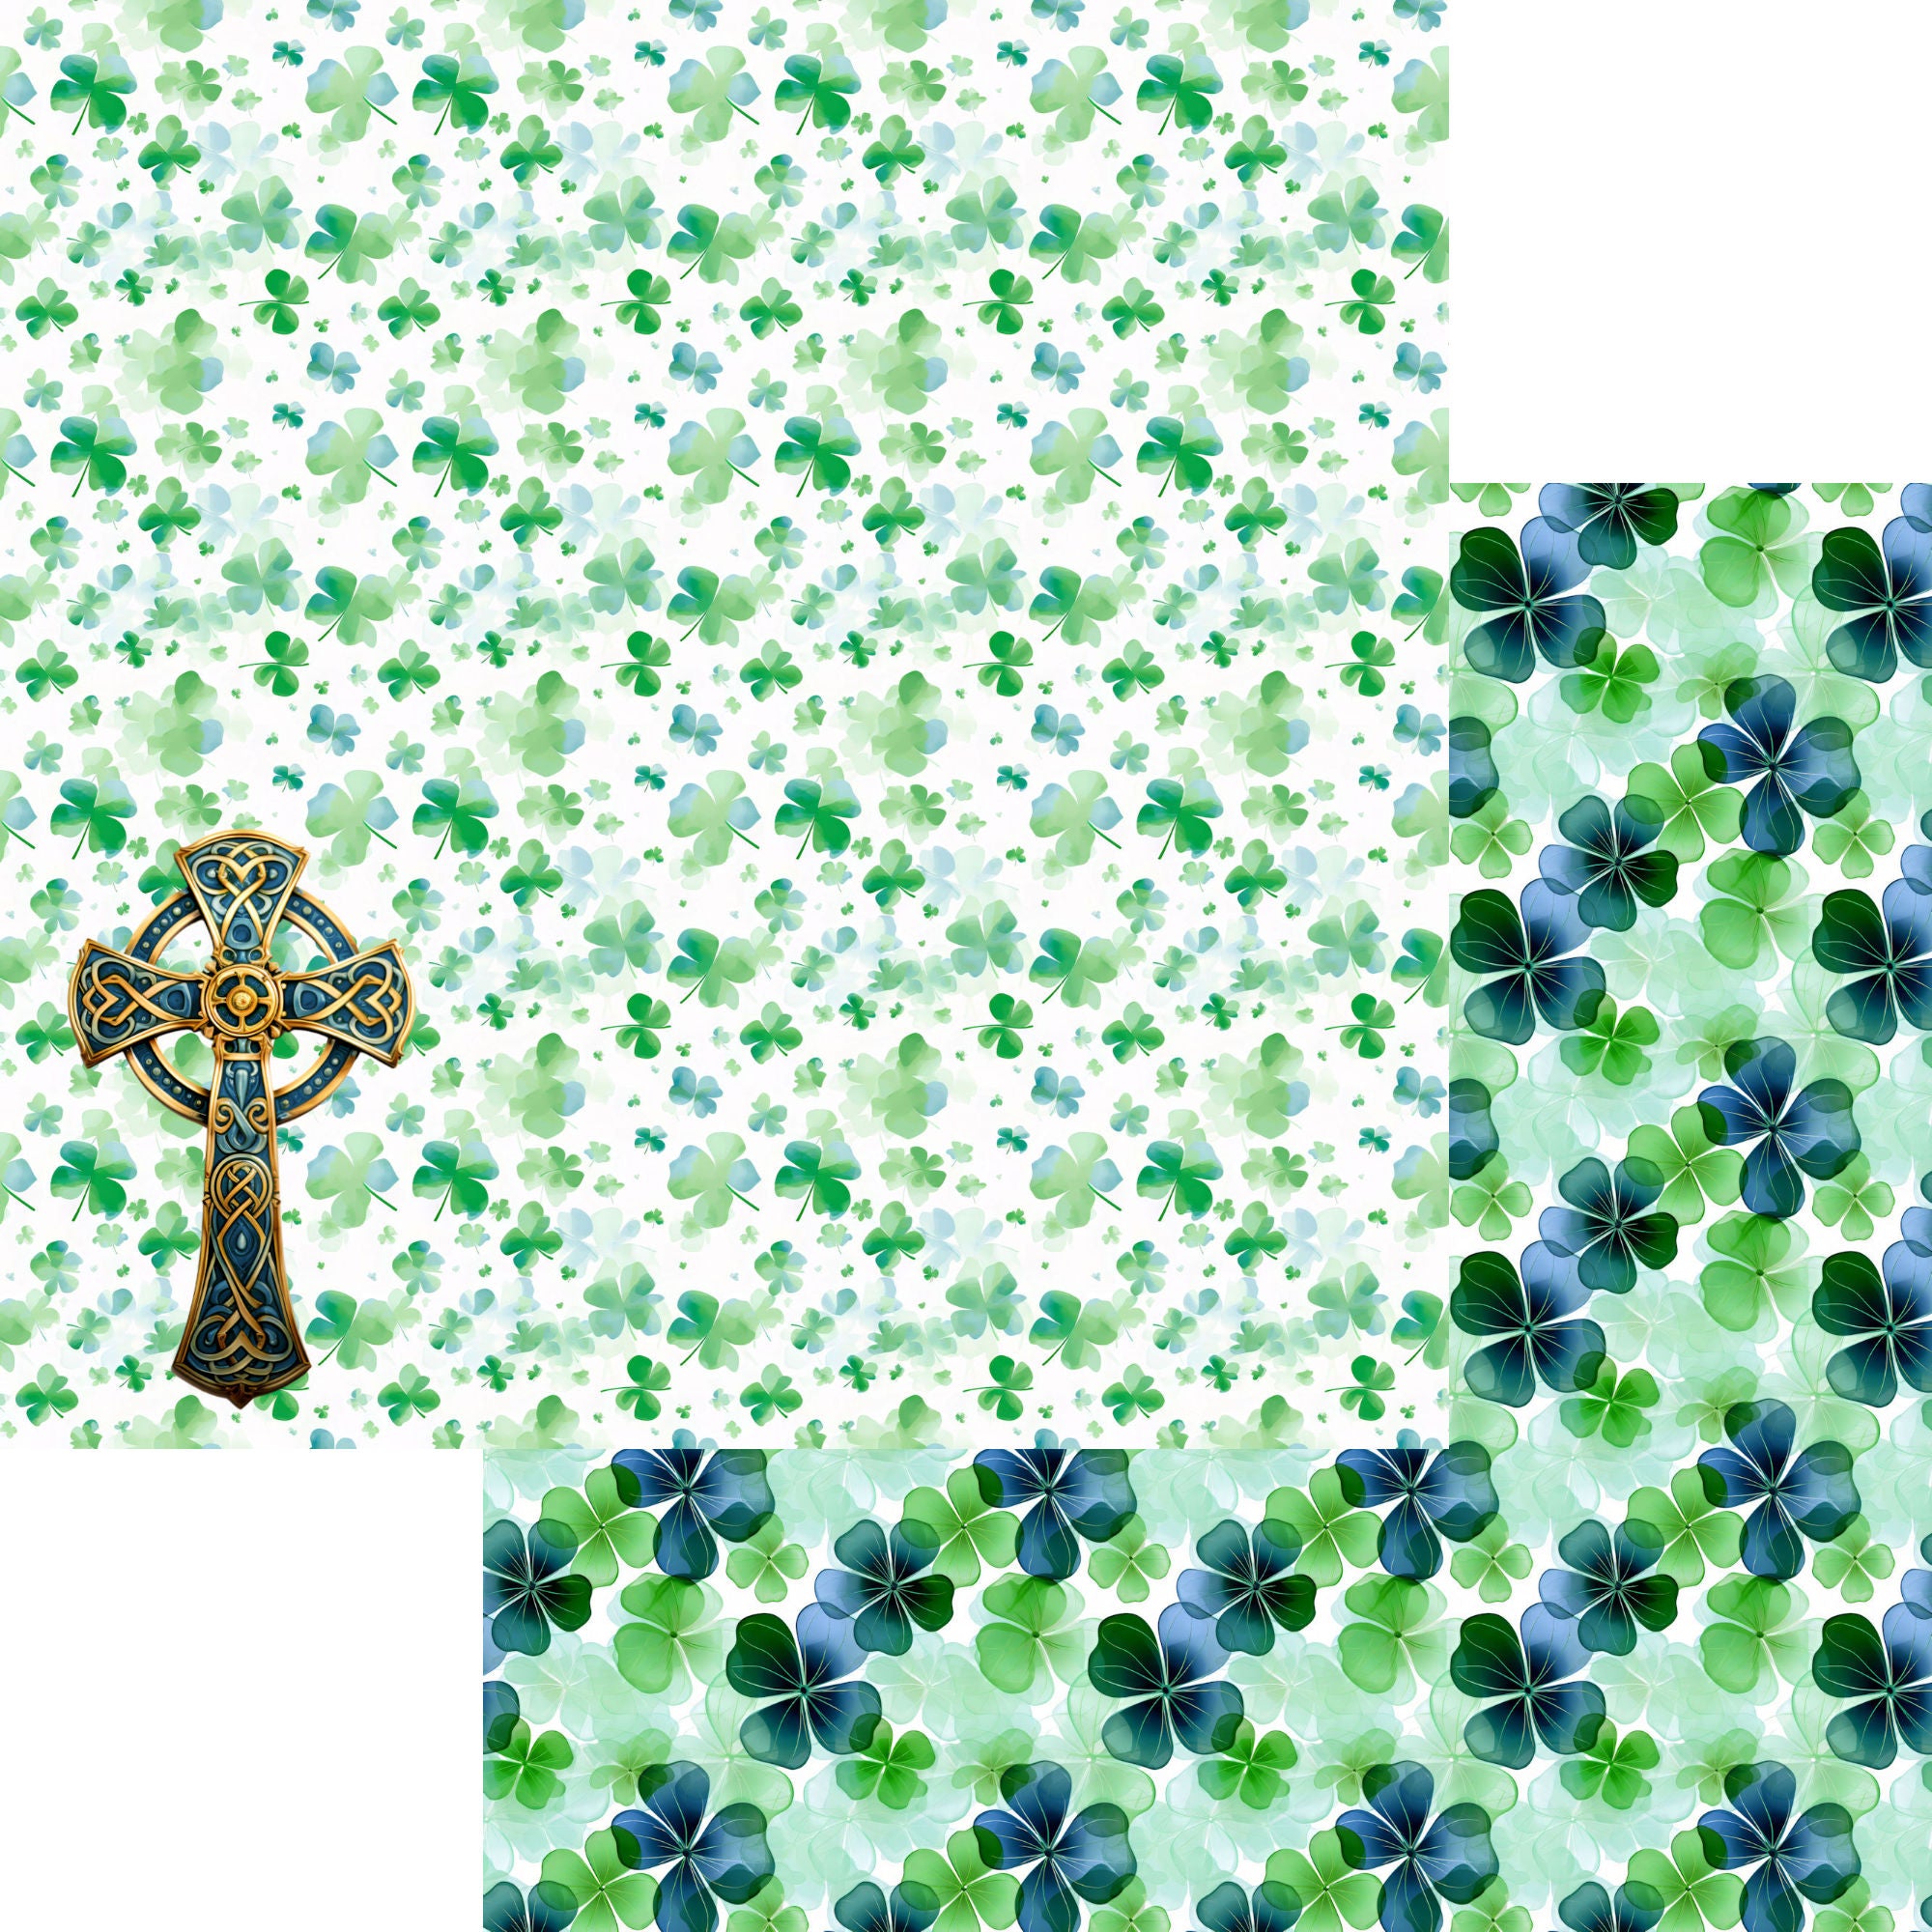 St. Patrick's Day Collection Celtic Cross 12 x 12 Double-Sided Scrapbook Paper by SSC Designs